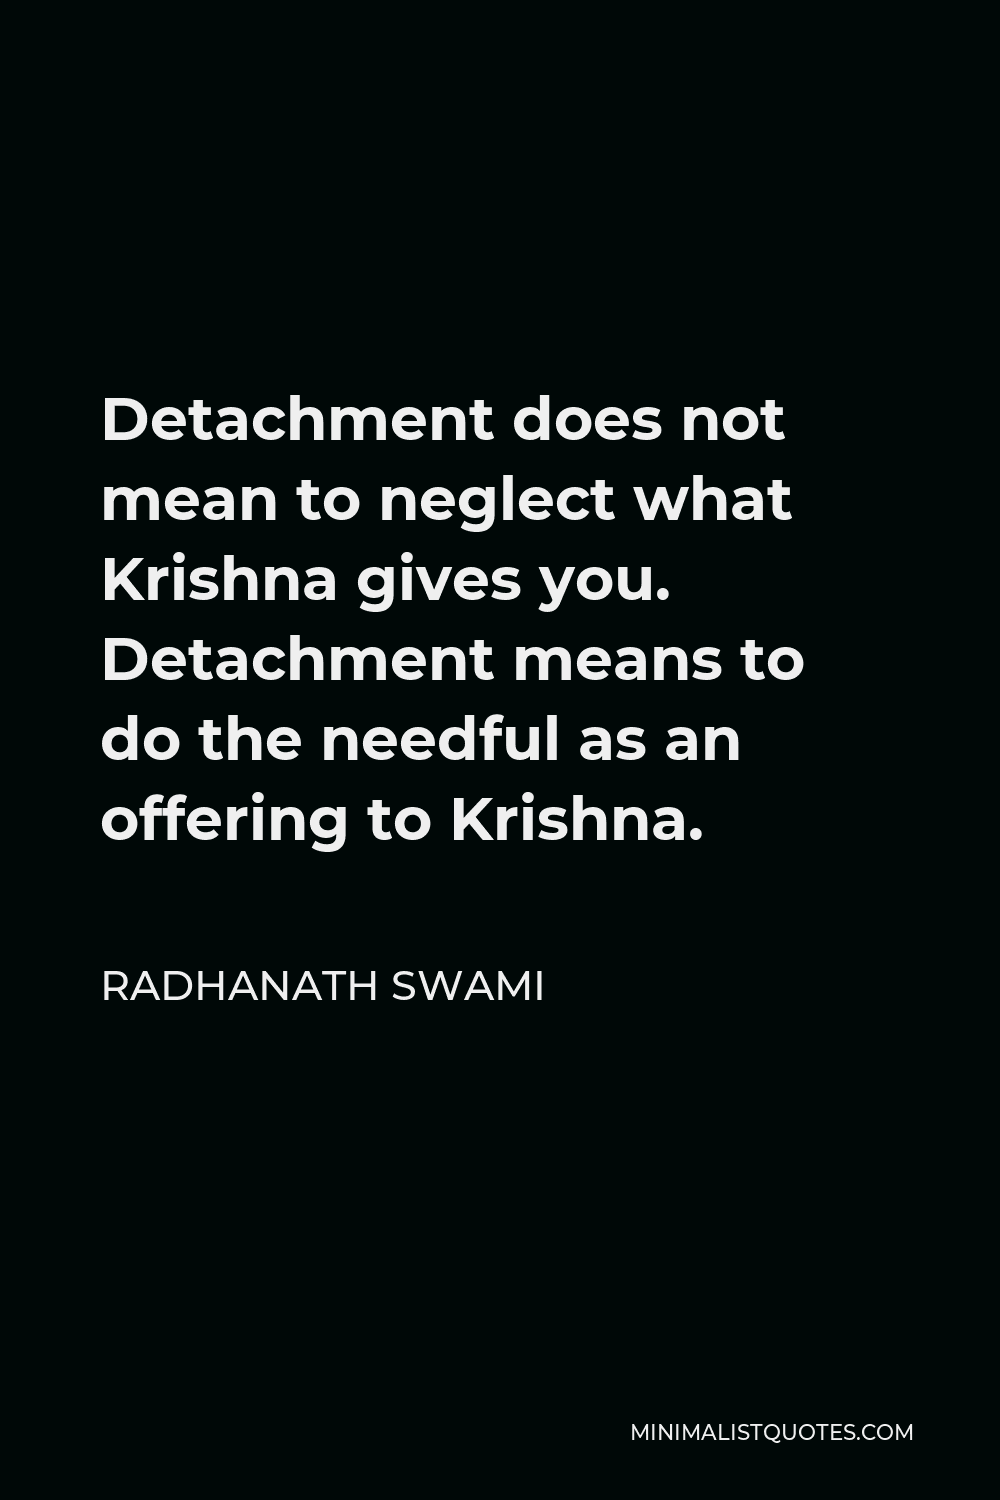 Radhanath Swami Quote - Detachment does not mean to neglect what Krishna gives you. Detachment means to do the needful as an offering to Krishna.